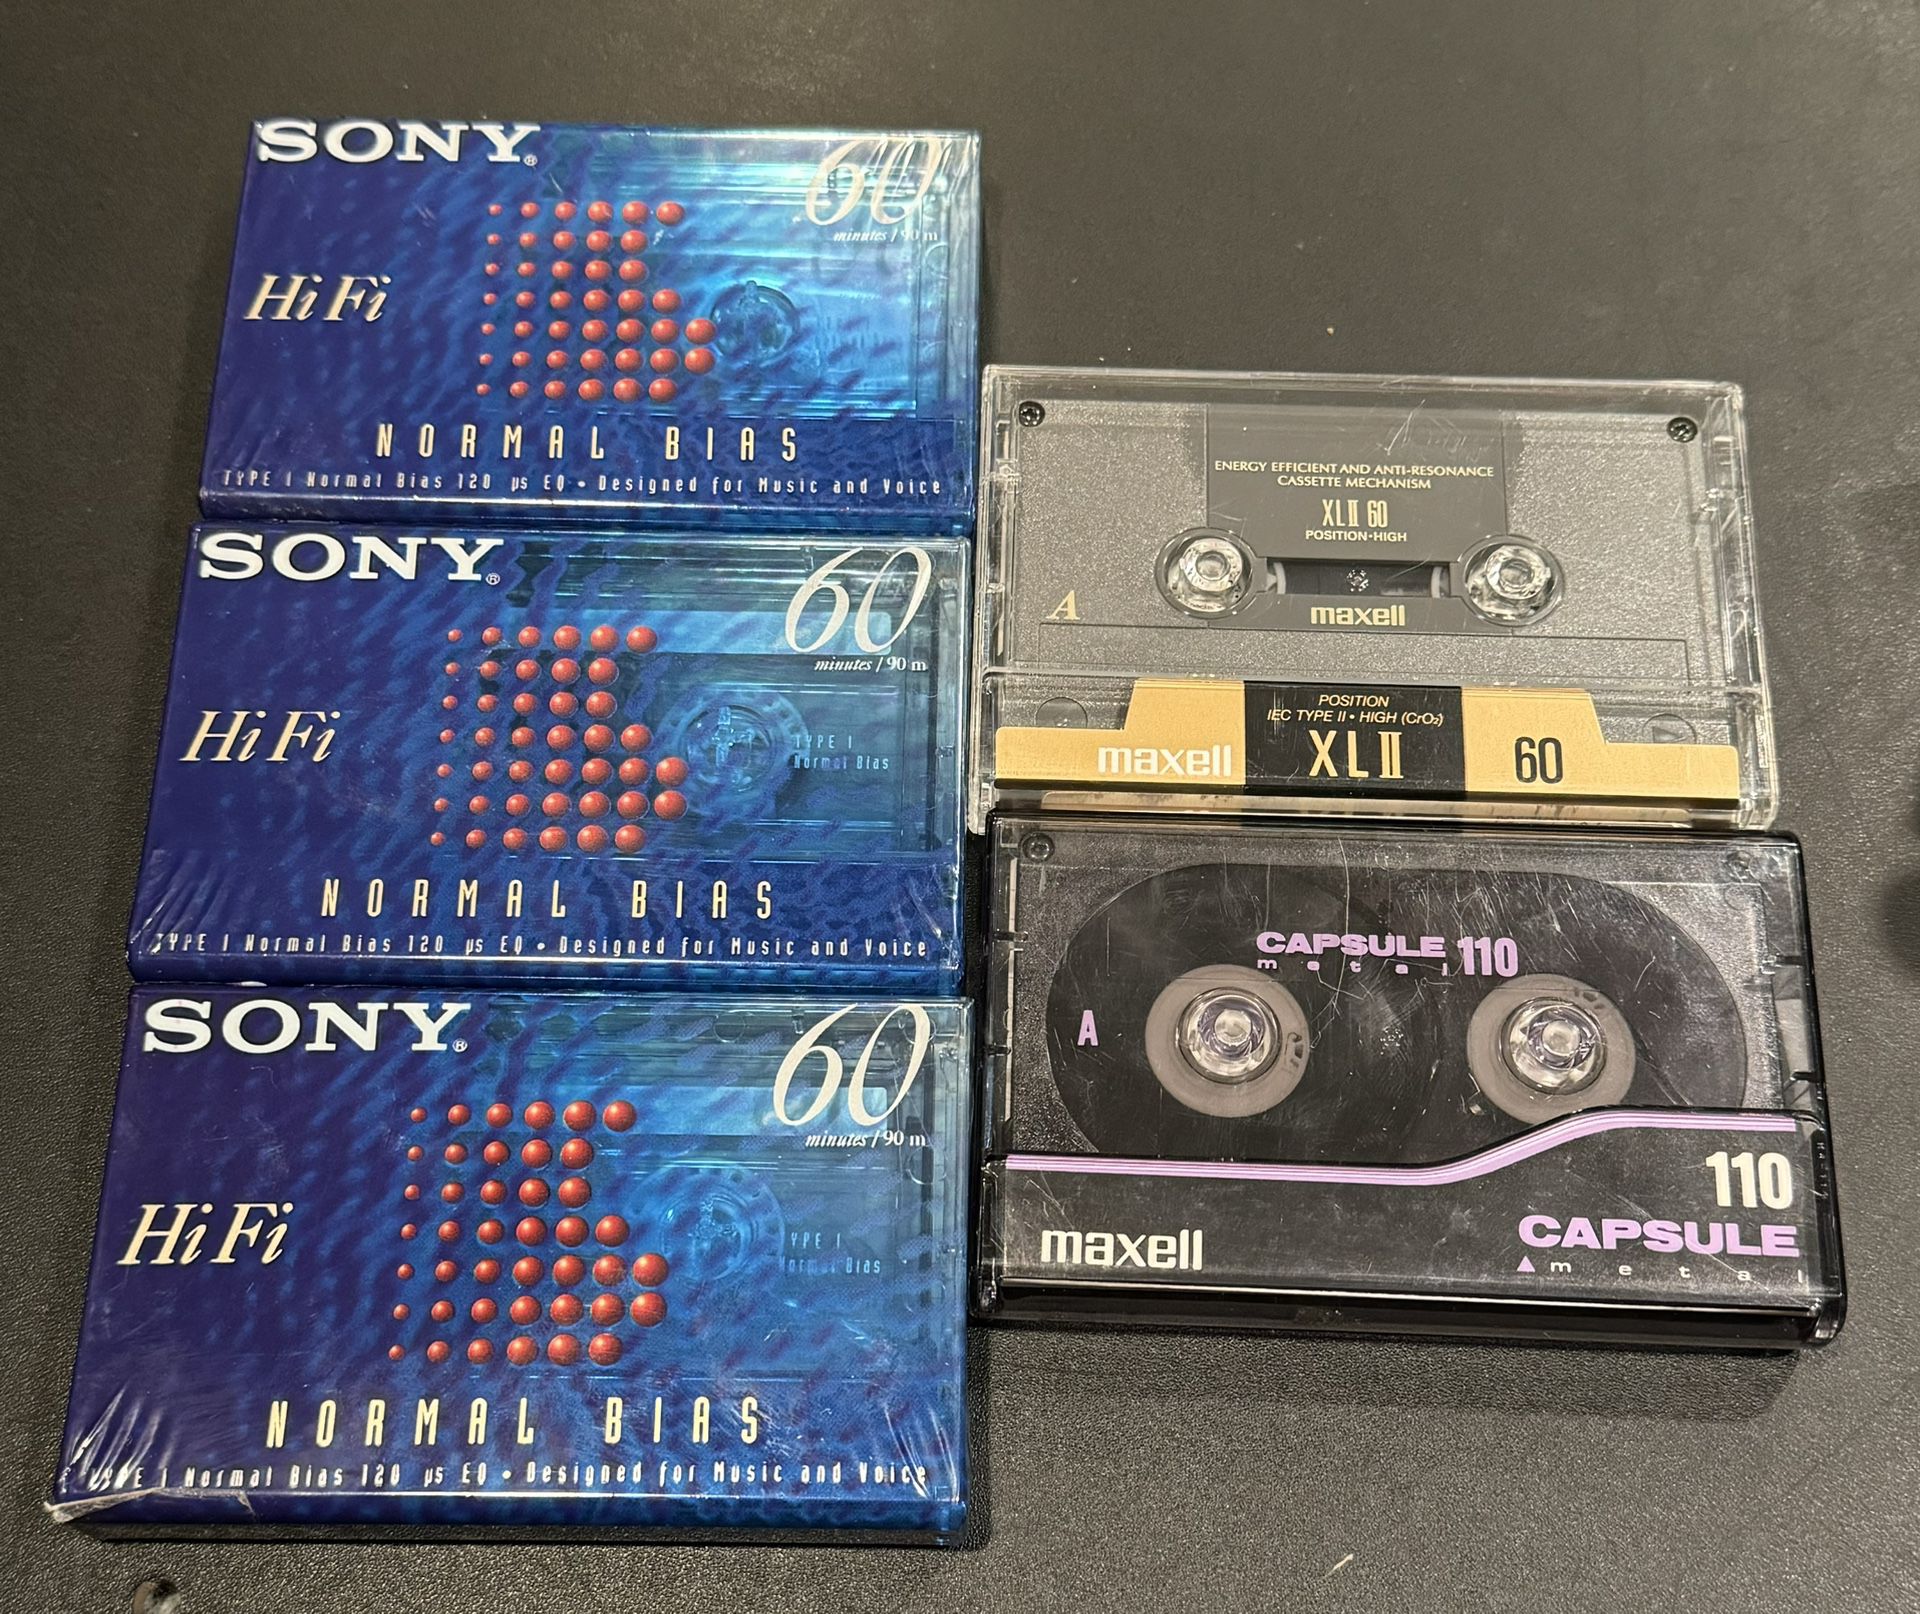 Vintage Cassette tape lot 5 pcs. Includes Maxell Capsule metal 110 Minute, 3 Sony Type 1 60 Minute , & Maxell High Bias XLII 60 Minute. The 3 Sony cas